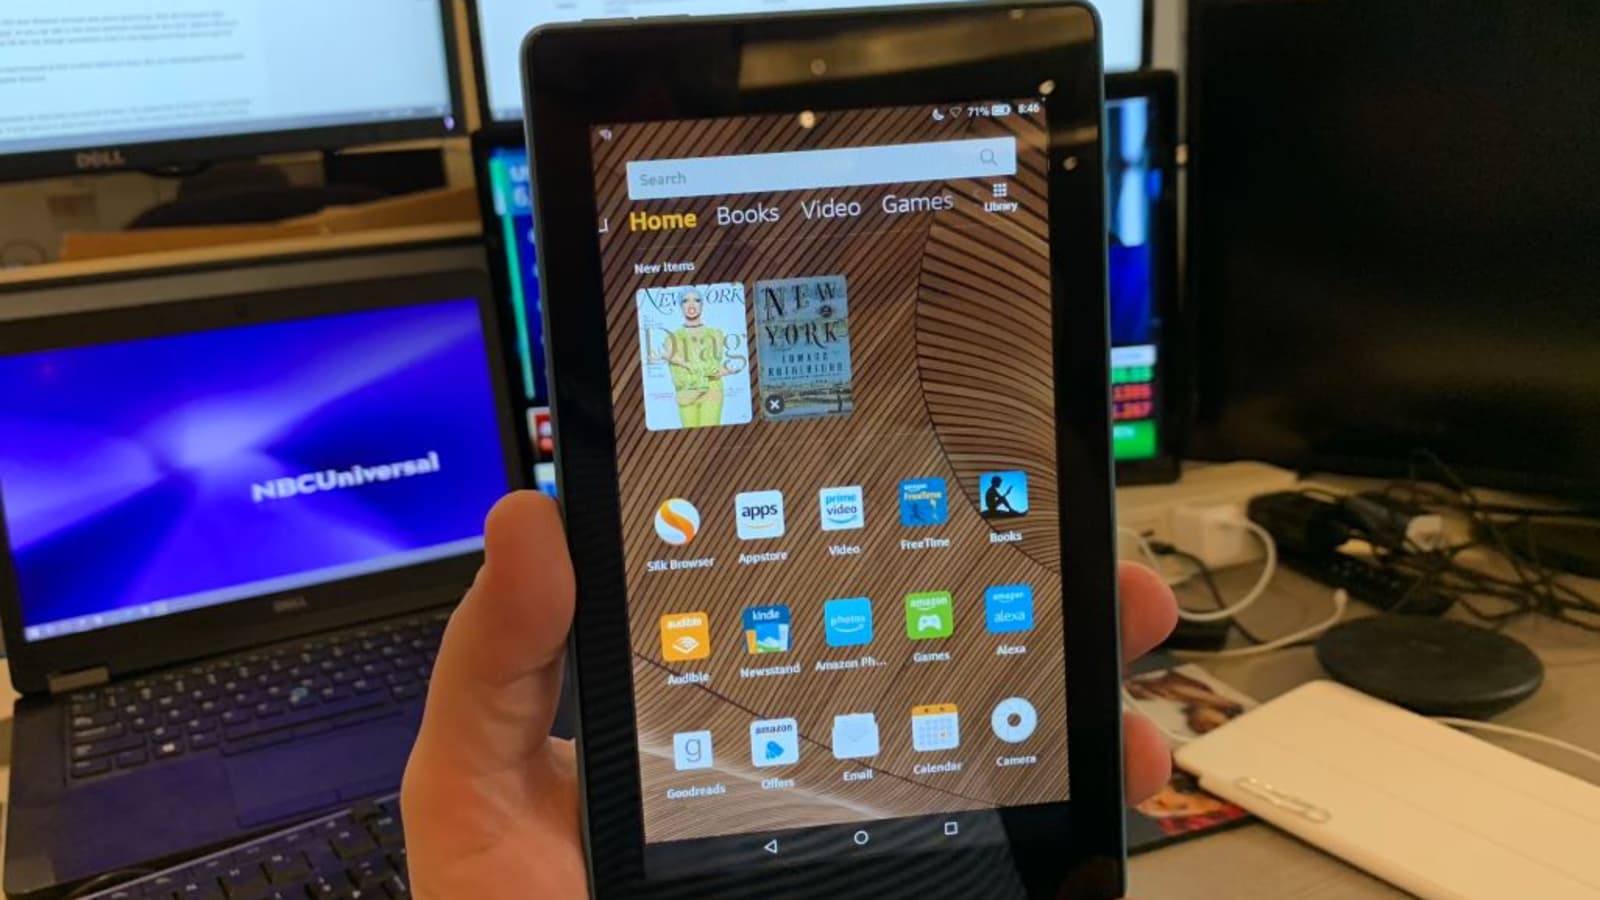 Amazon Fire 7 2019 Tablet Review Skip It Buy Fire Hd8 Instead - how to upgrade roblox on amazon fire tablet